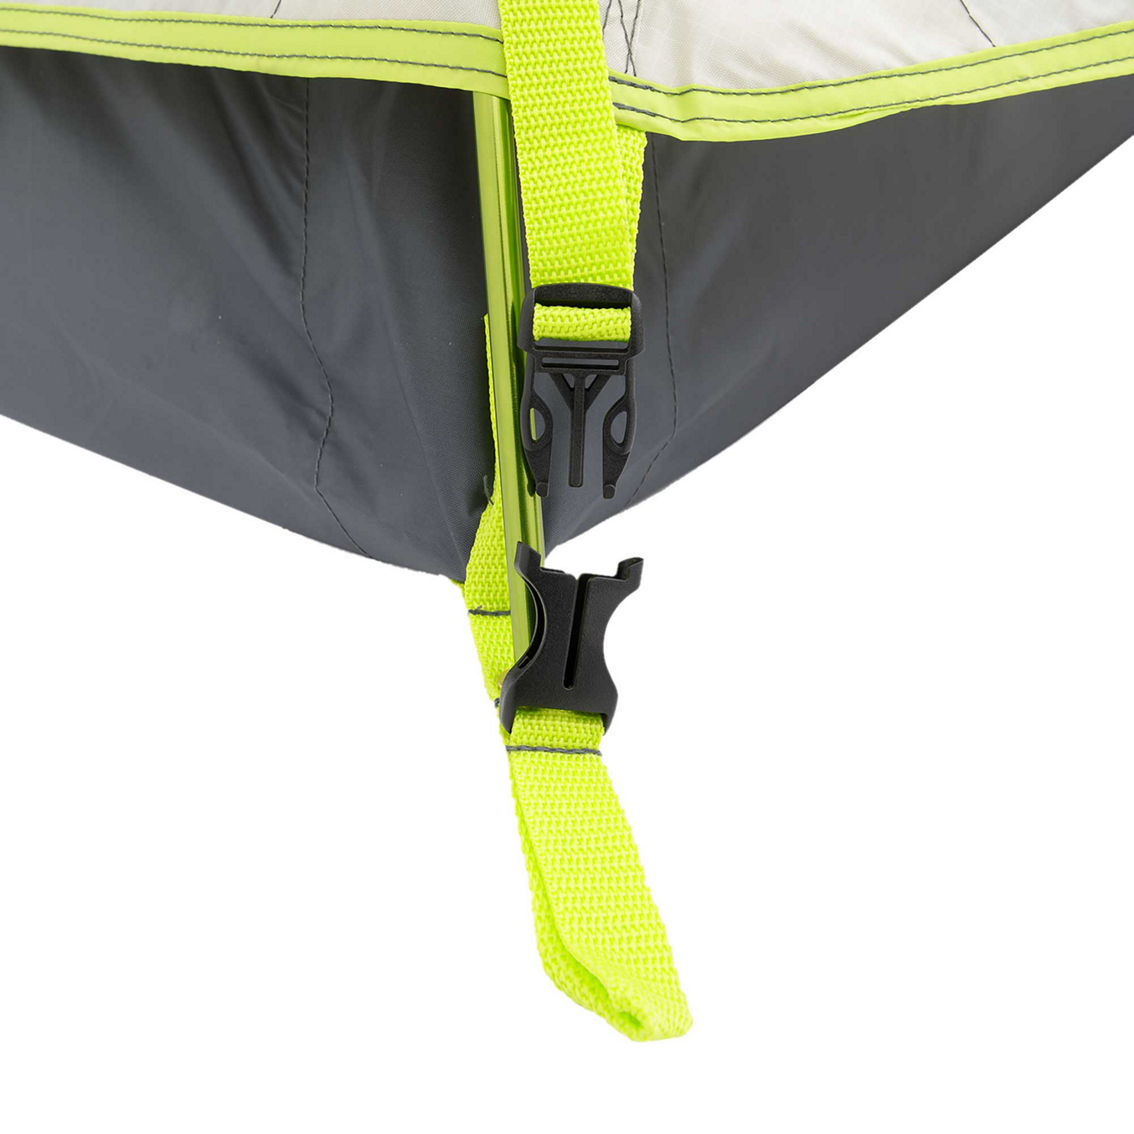 Outdoor Products 4P Backpacking Tent w/ 2 Vestibules - Image 7 of 9